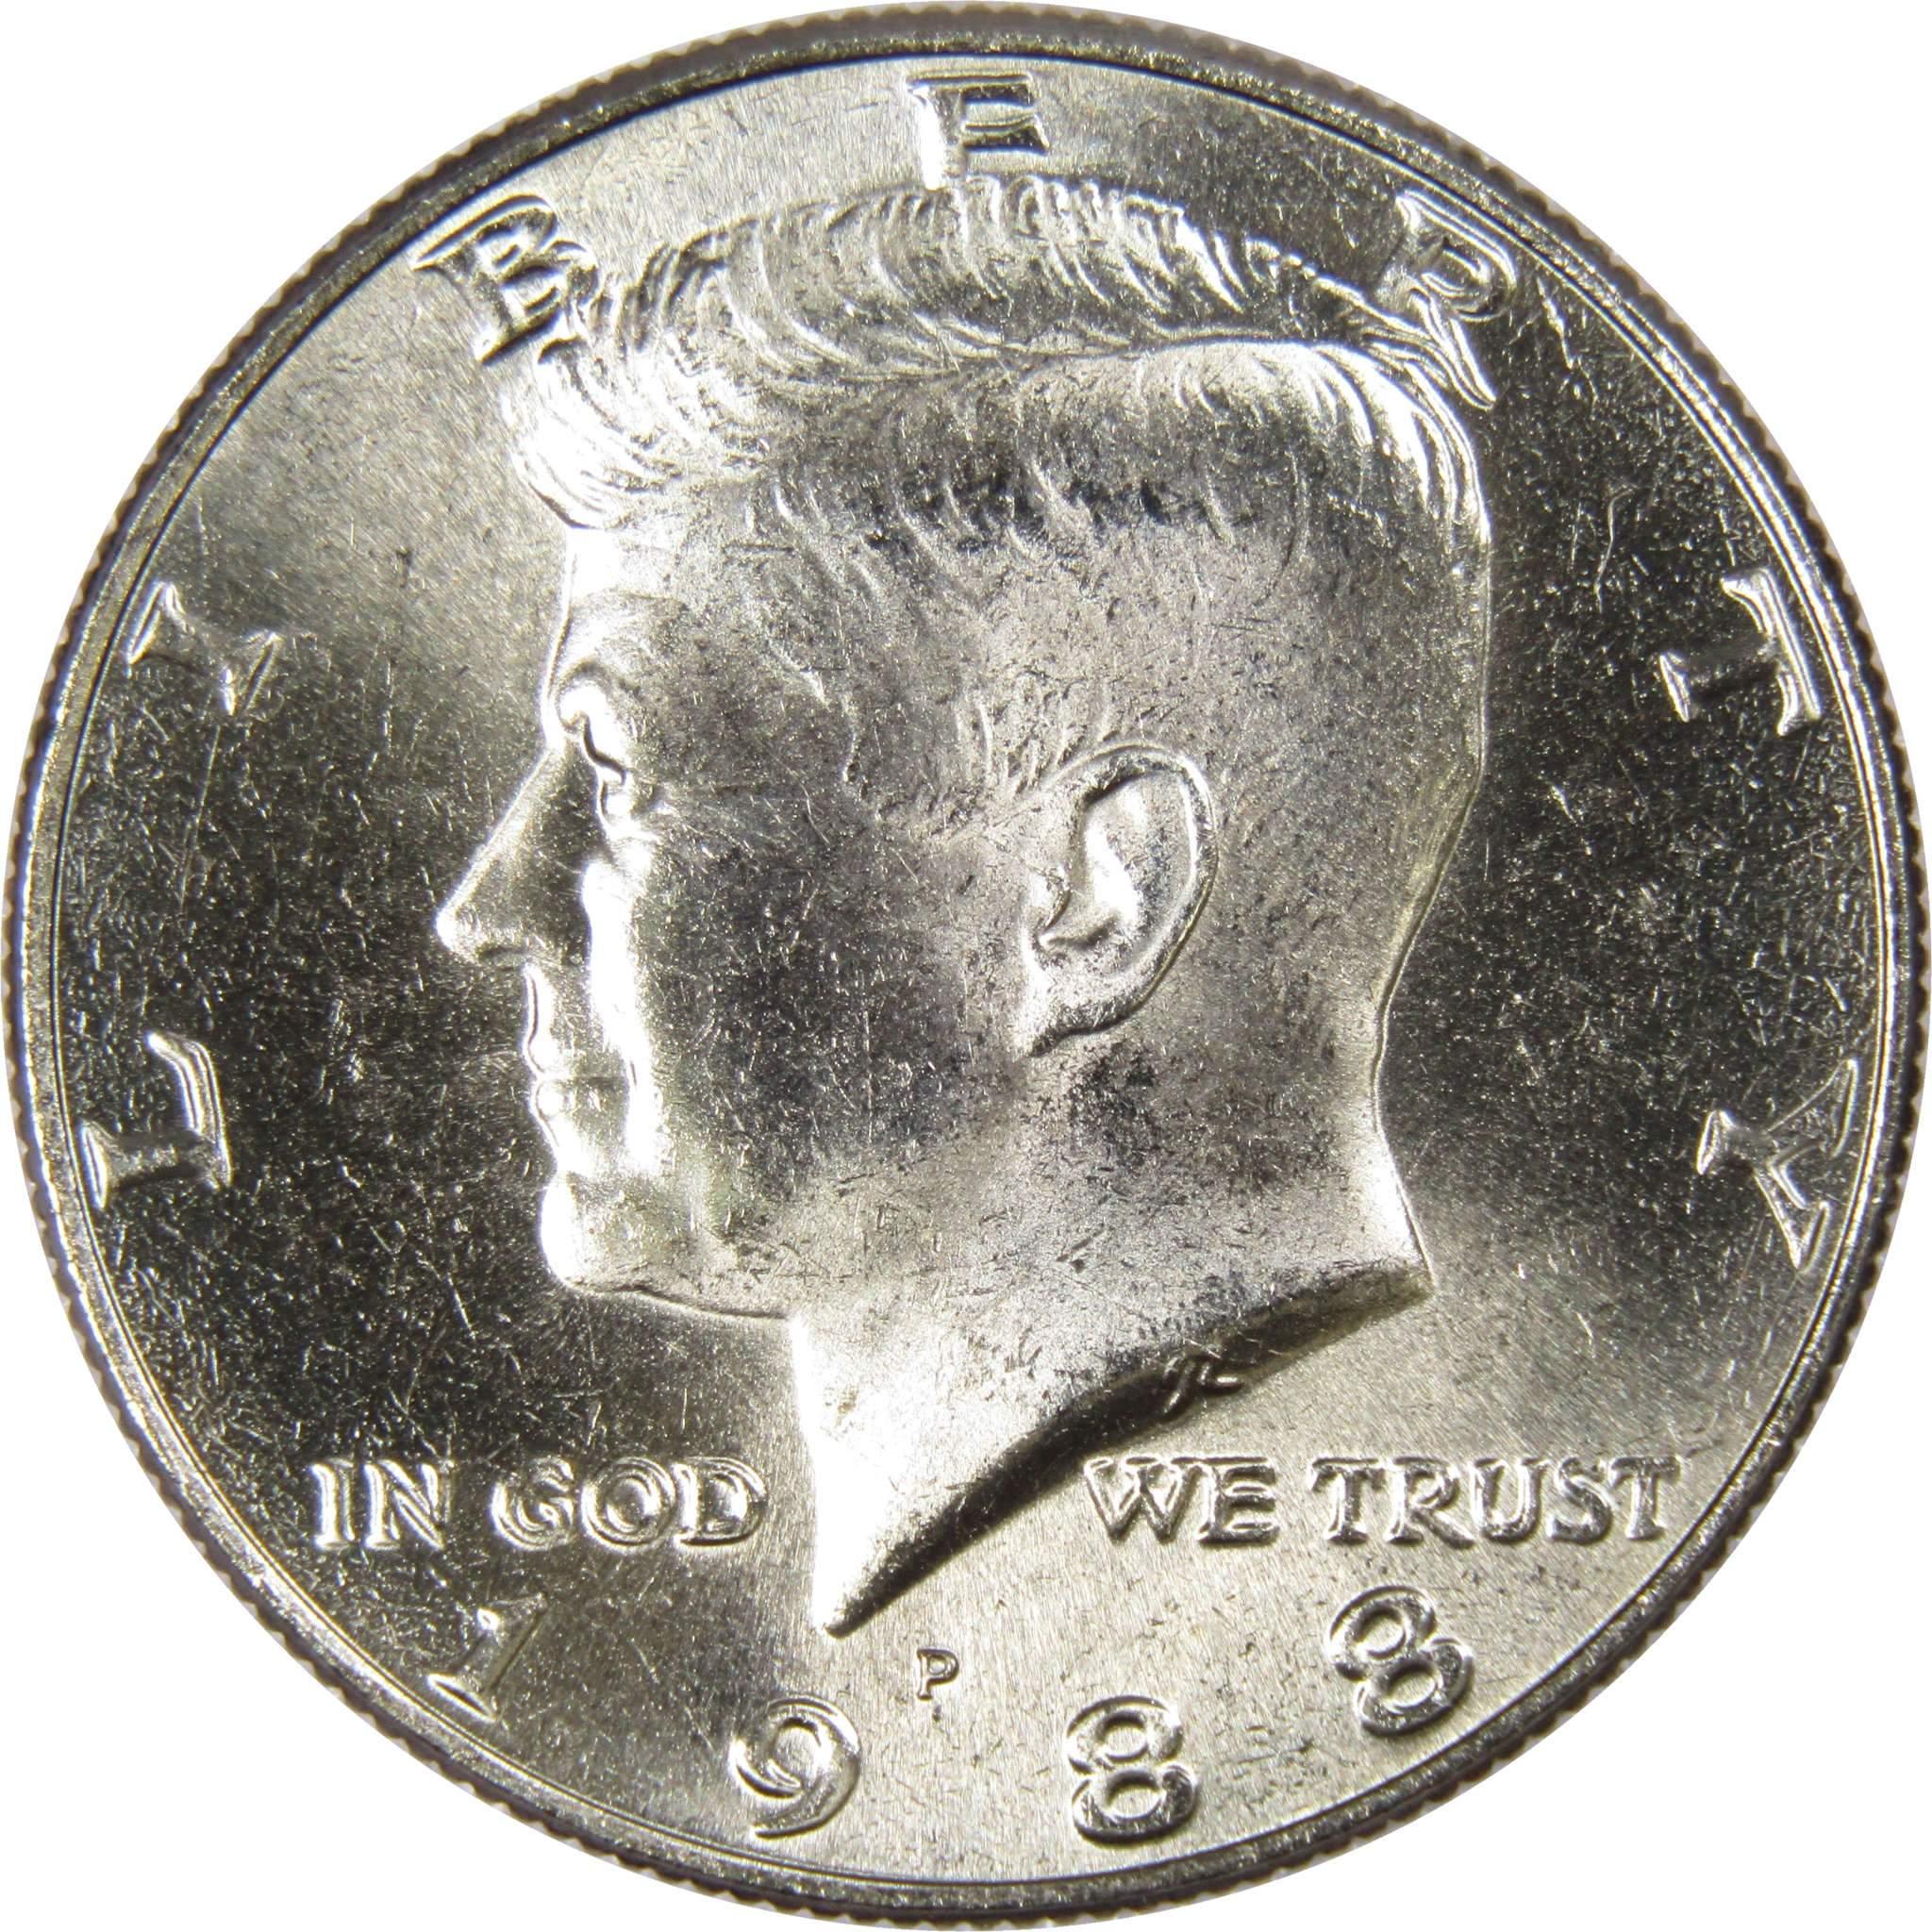 1988 P Kennedy Half Dollar BU Uncirculated Mint State 50c US Coin Collectible